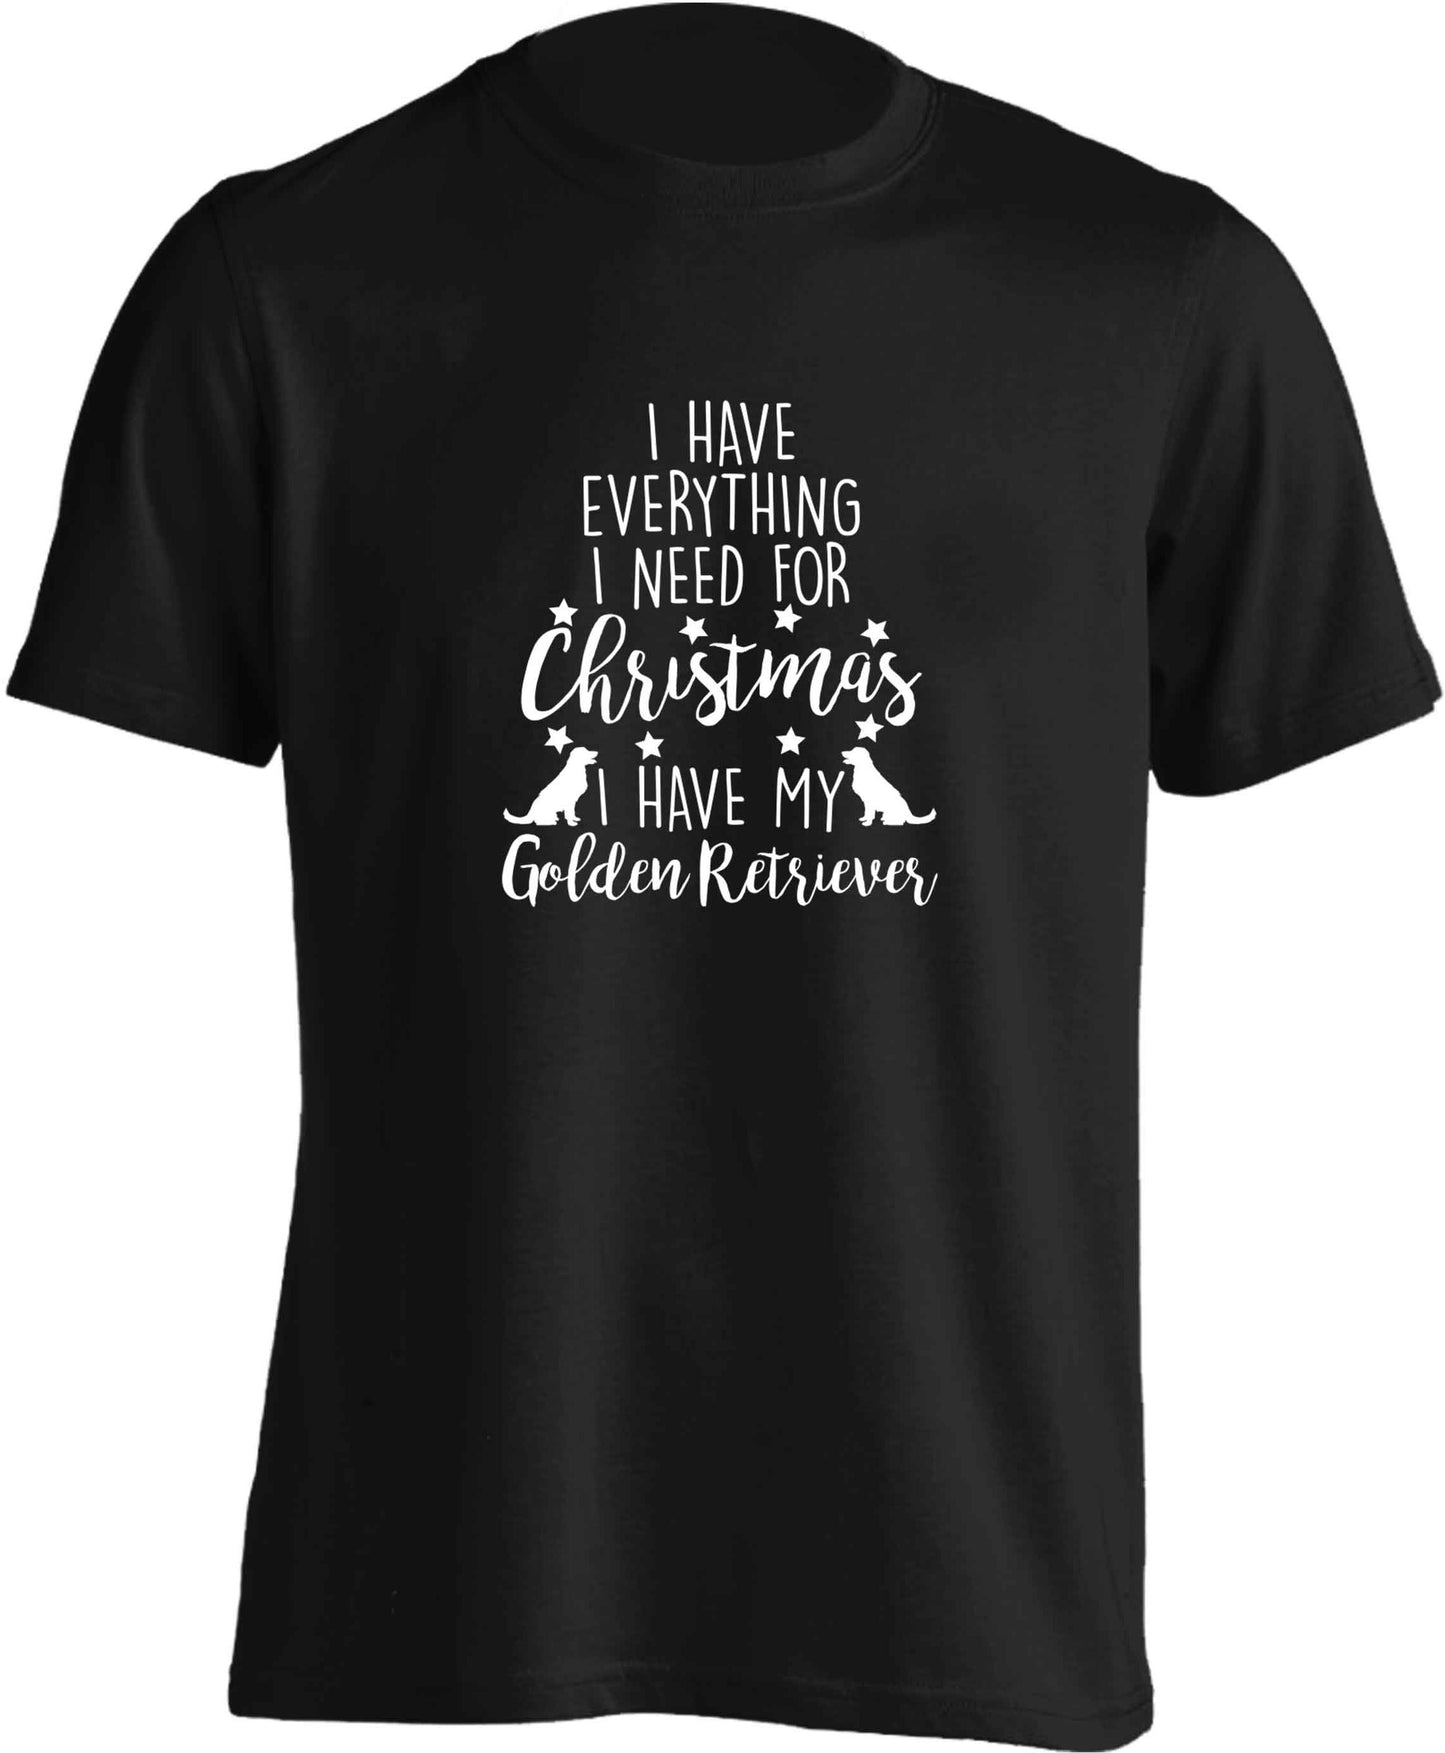 I have everything I need for Christmas I have my golden retriever adults unisex black Tshirt 2XL